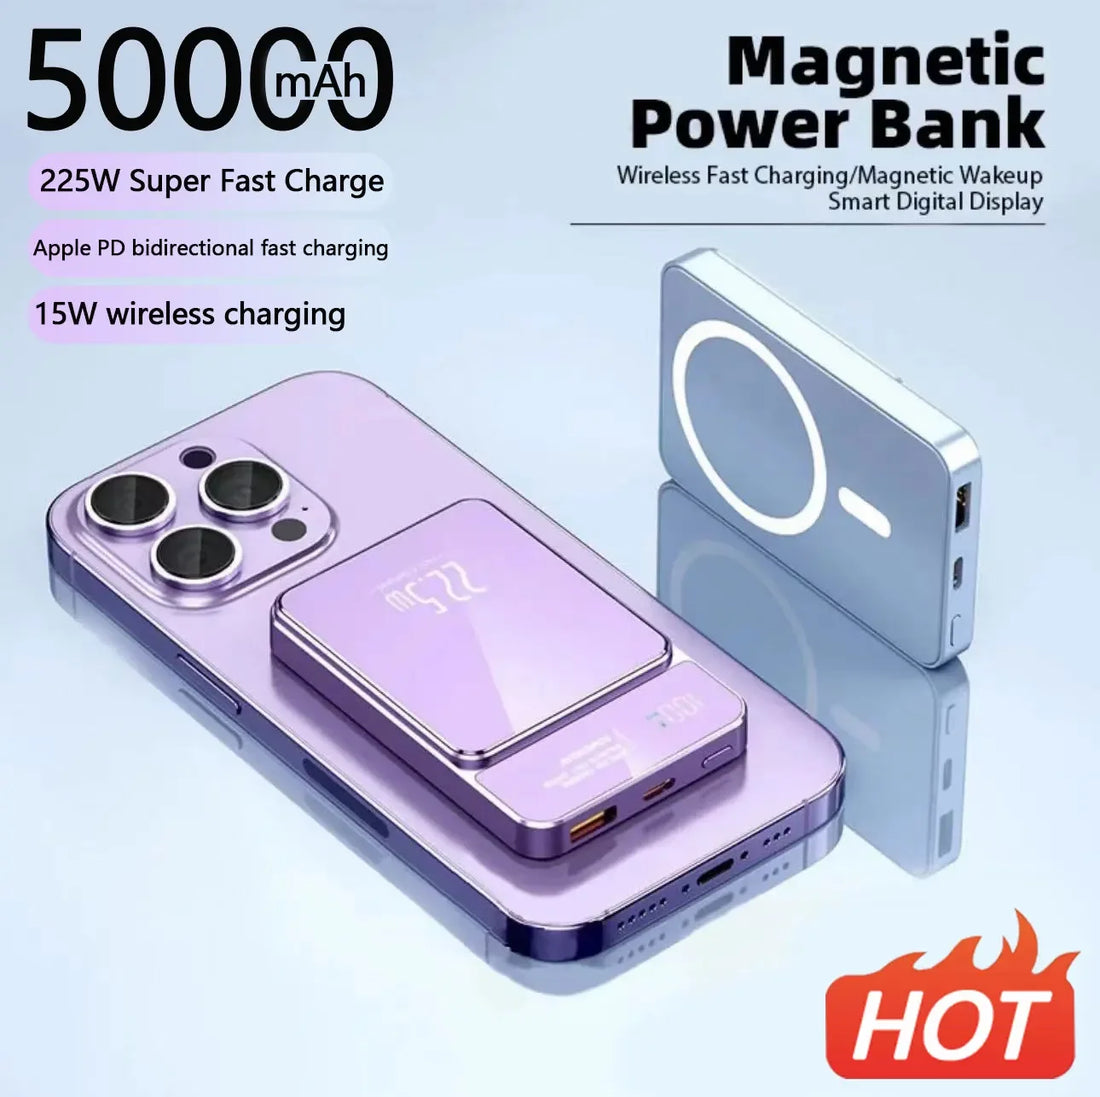 Power Bank 50000 MAh Wireless Magnetic Power Bank Magsafe Super Fast Charging Suitable for iPhone Xiaomi Samsung Huawei - Best Electrical Accessories